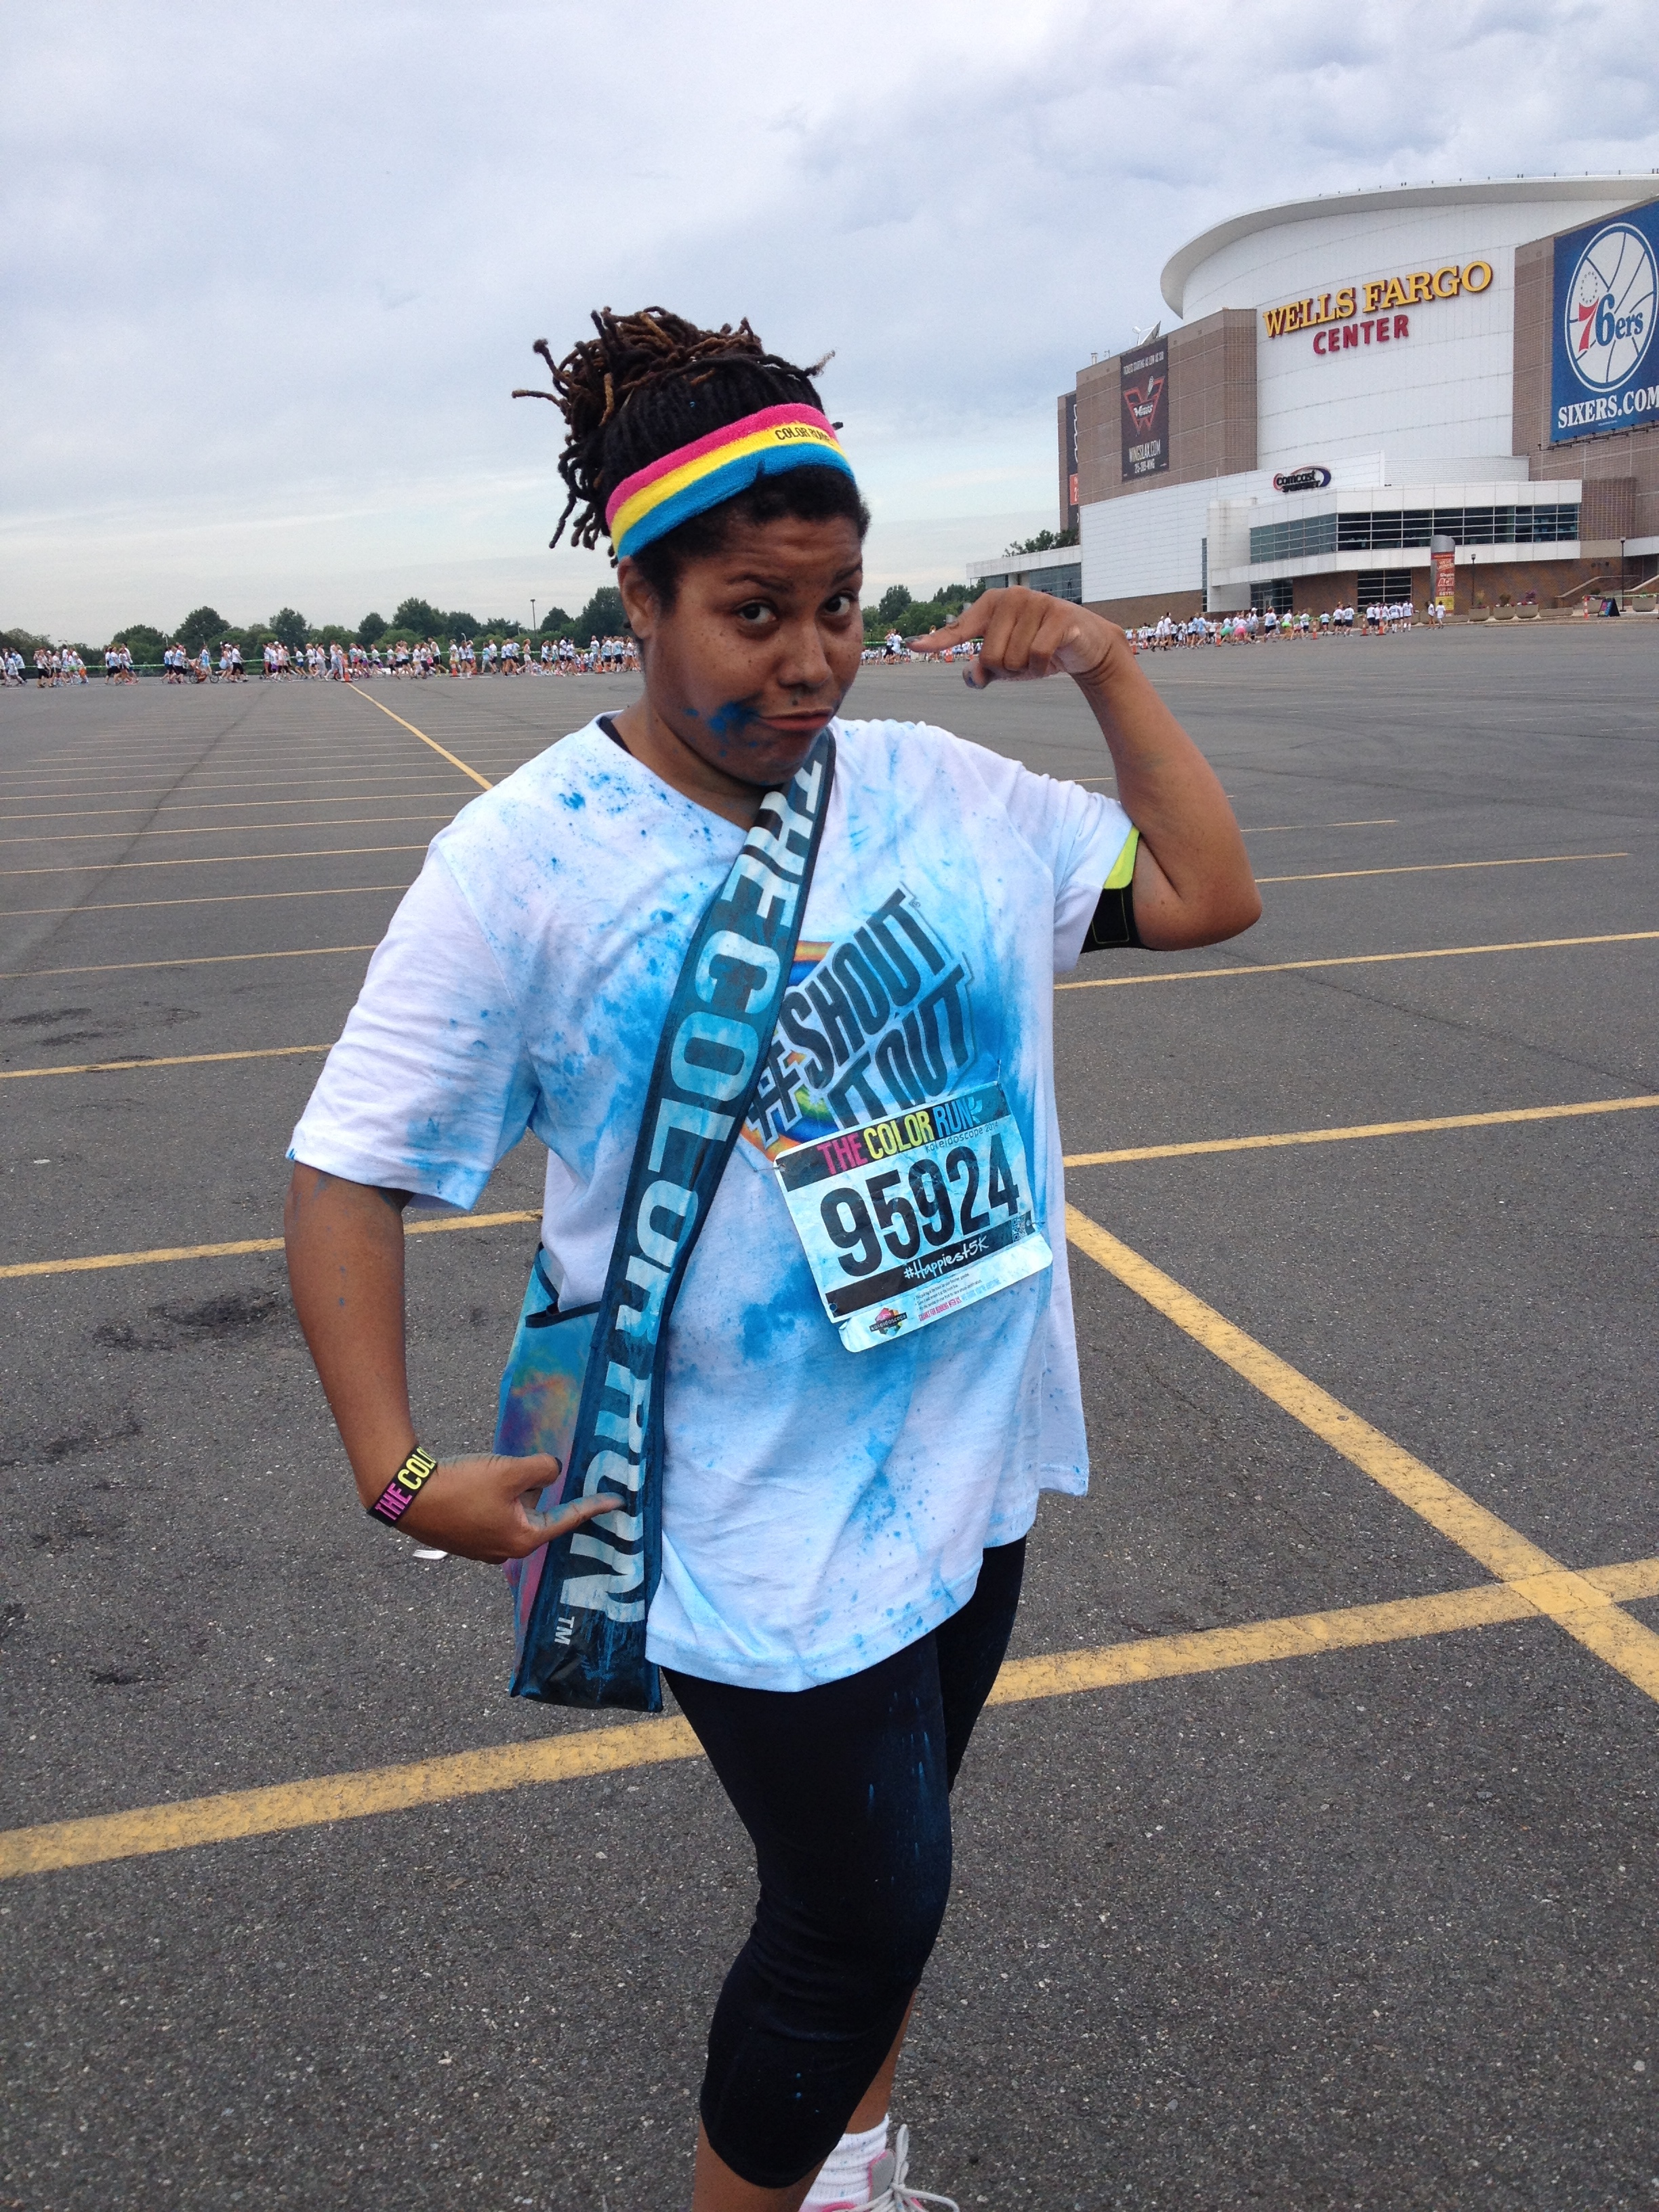 Register for #TheHappiest5k and get $5 off! #ad